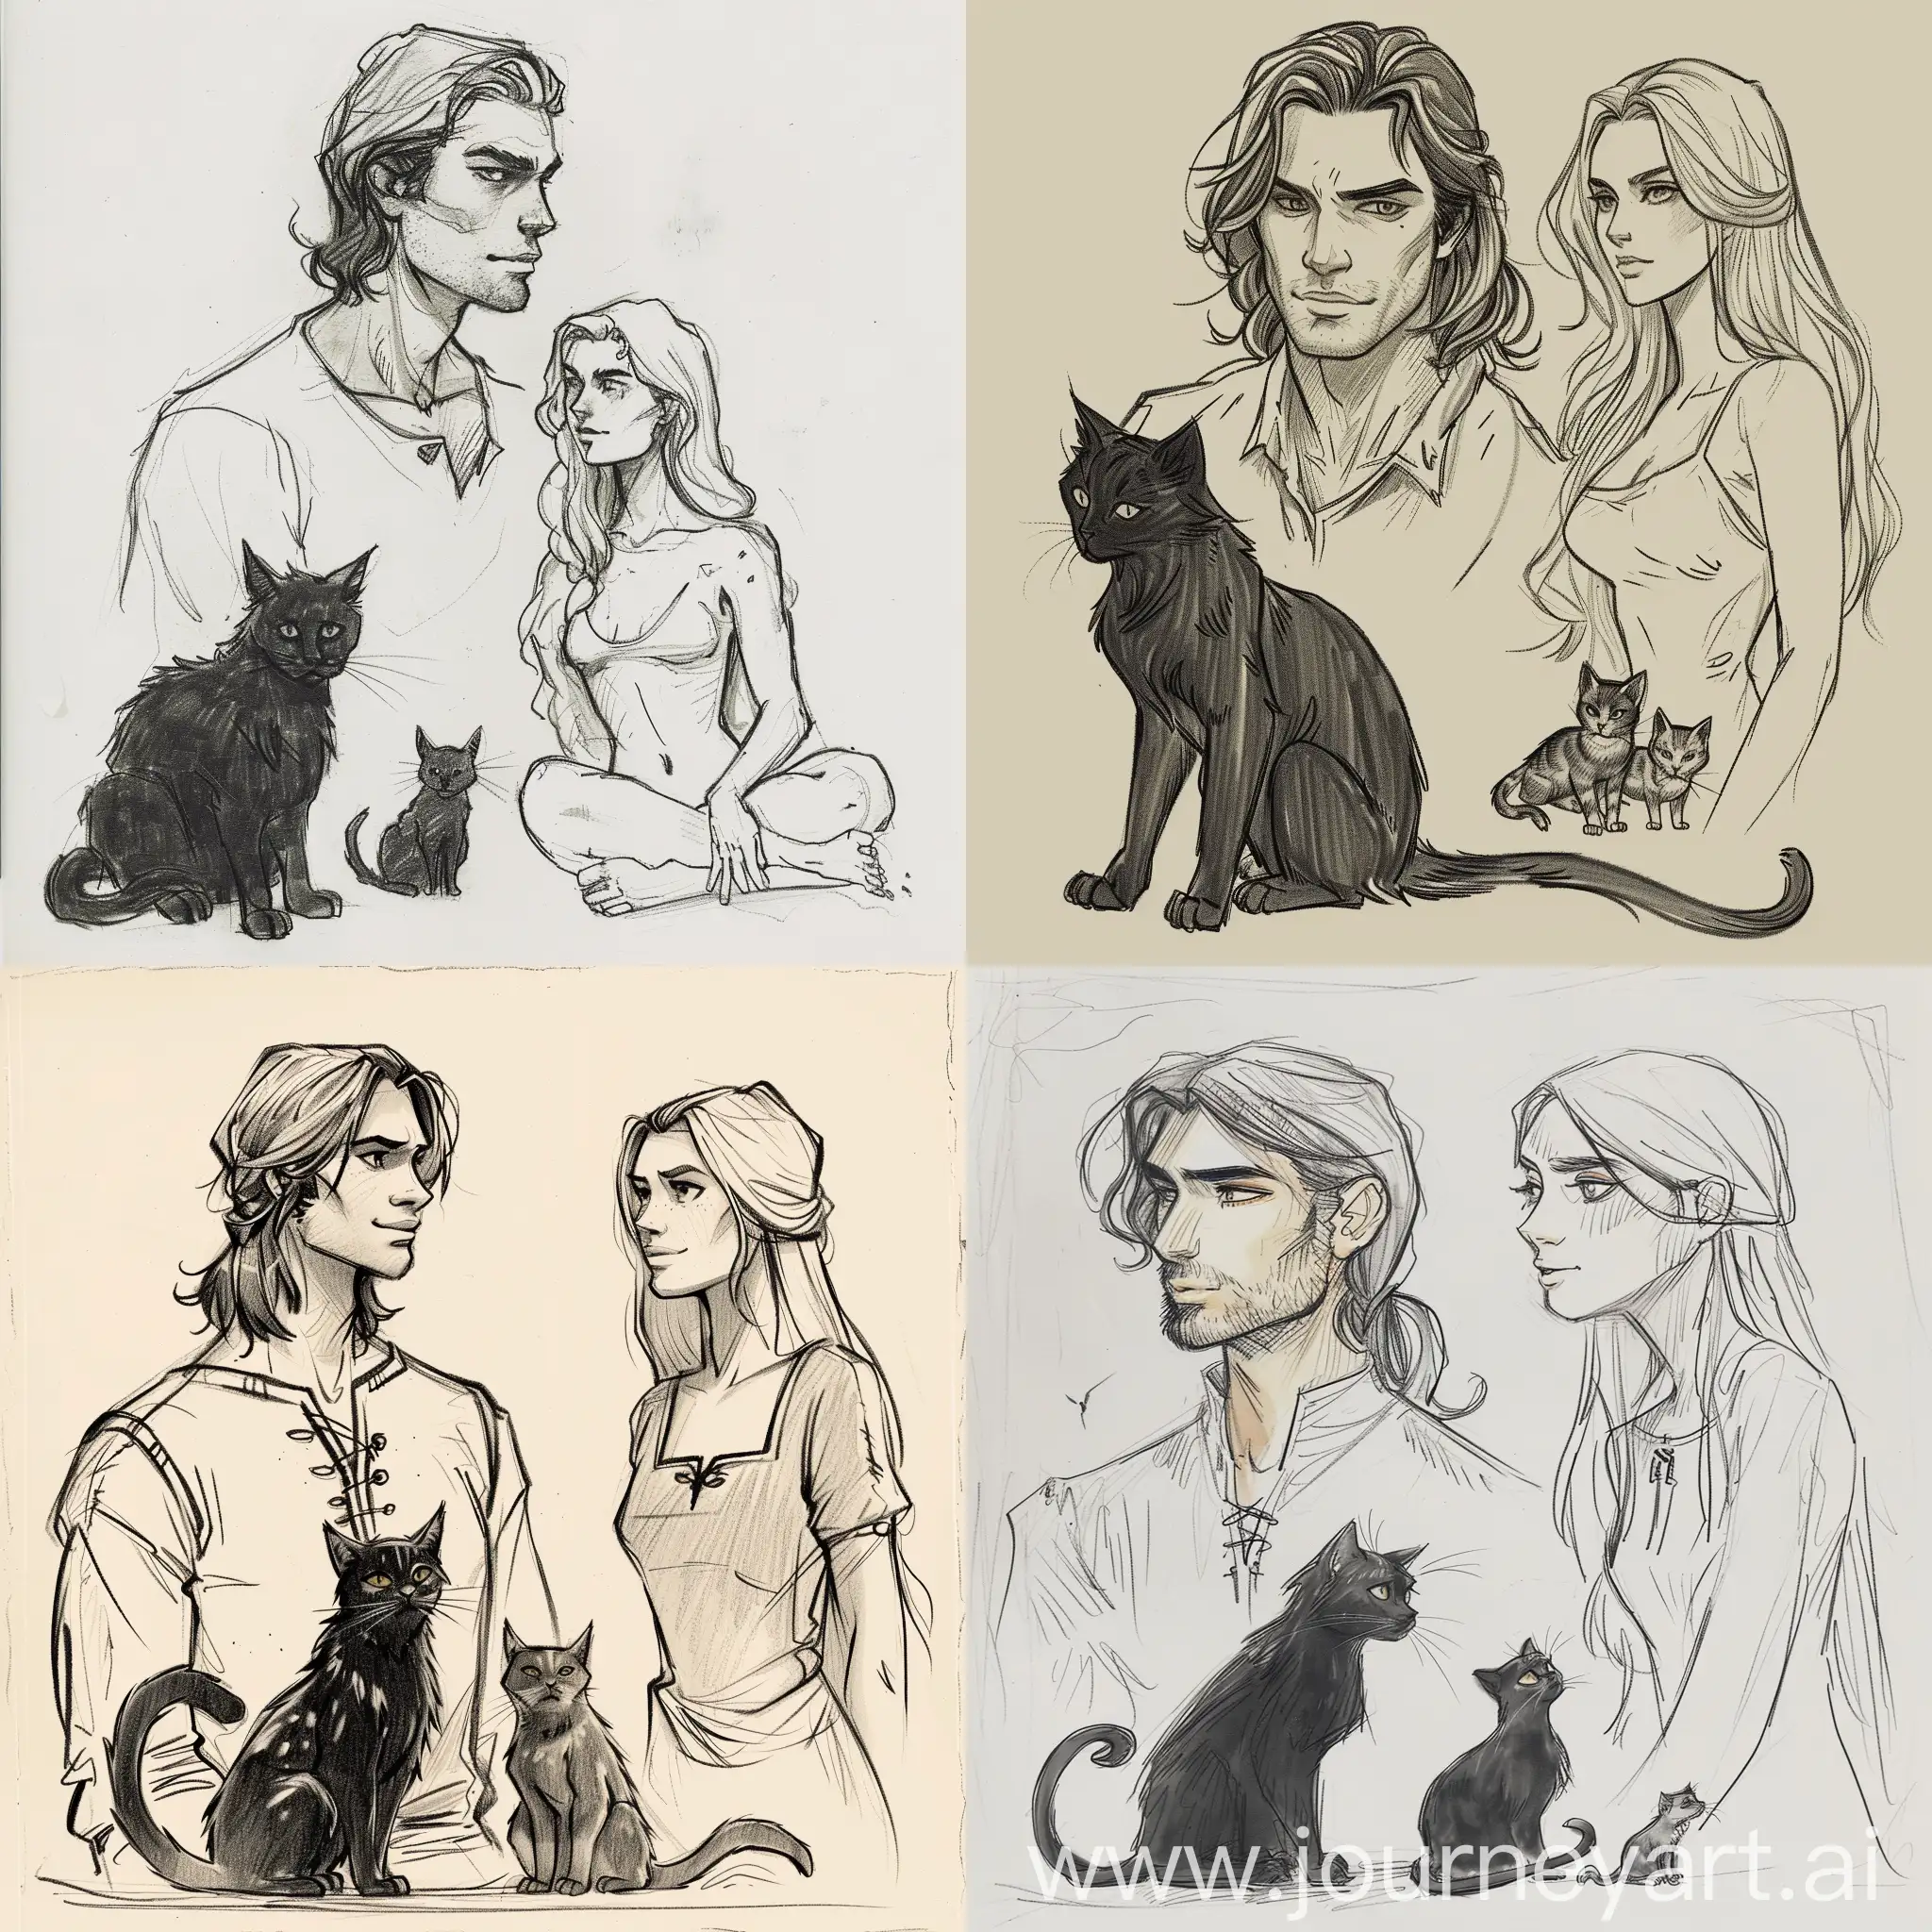 Slavic-Man-with-Black-Cat-Gazing-at-Blonde-Woman-with-Cats